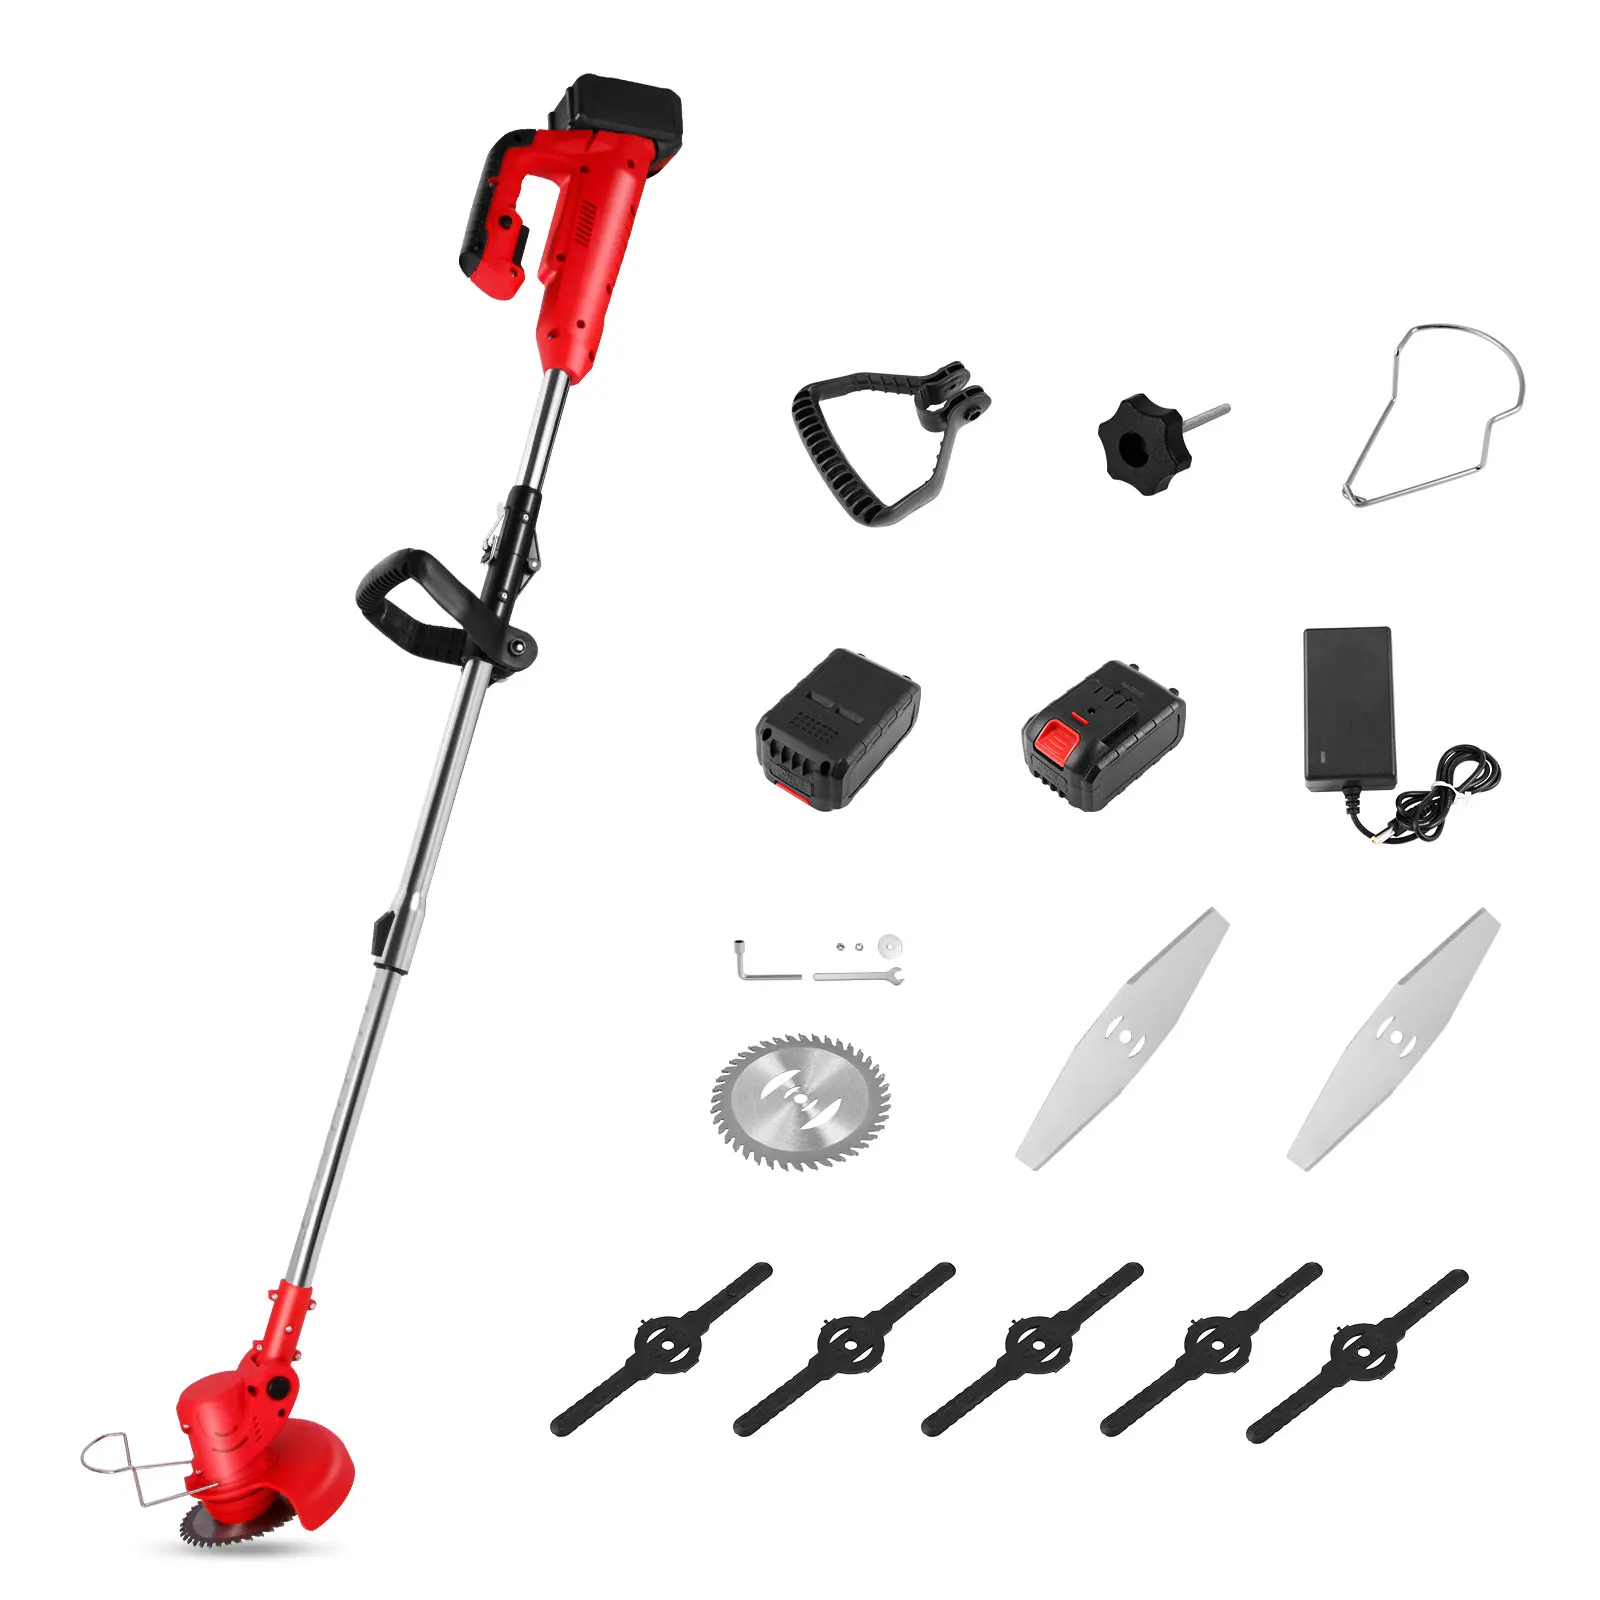 400W 18000PRM Electric Lawn Mower Cordless Grass Trimmer Length Adjustable Foldable Cutter Garden Tools With 2 Li-Ion Battery